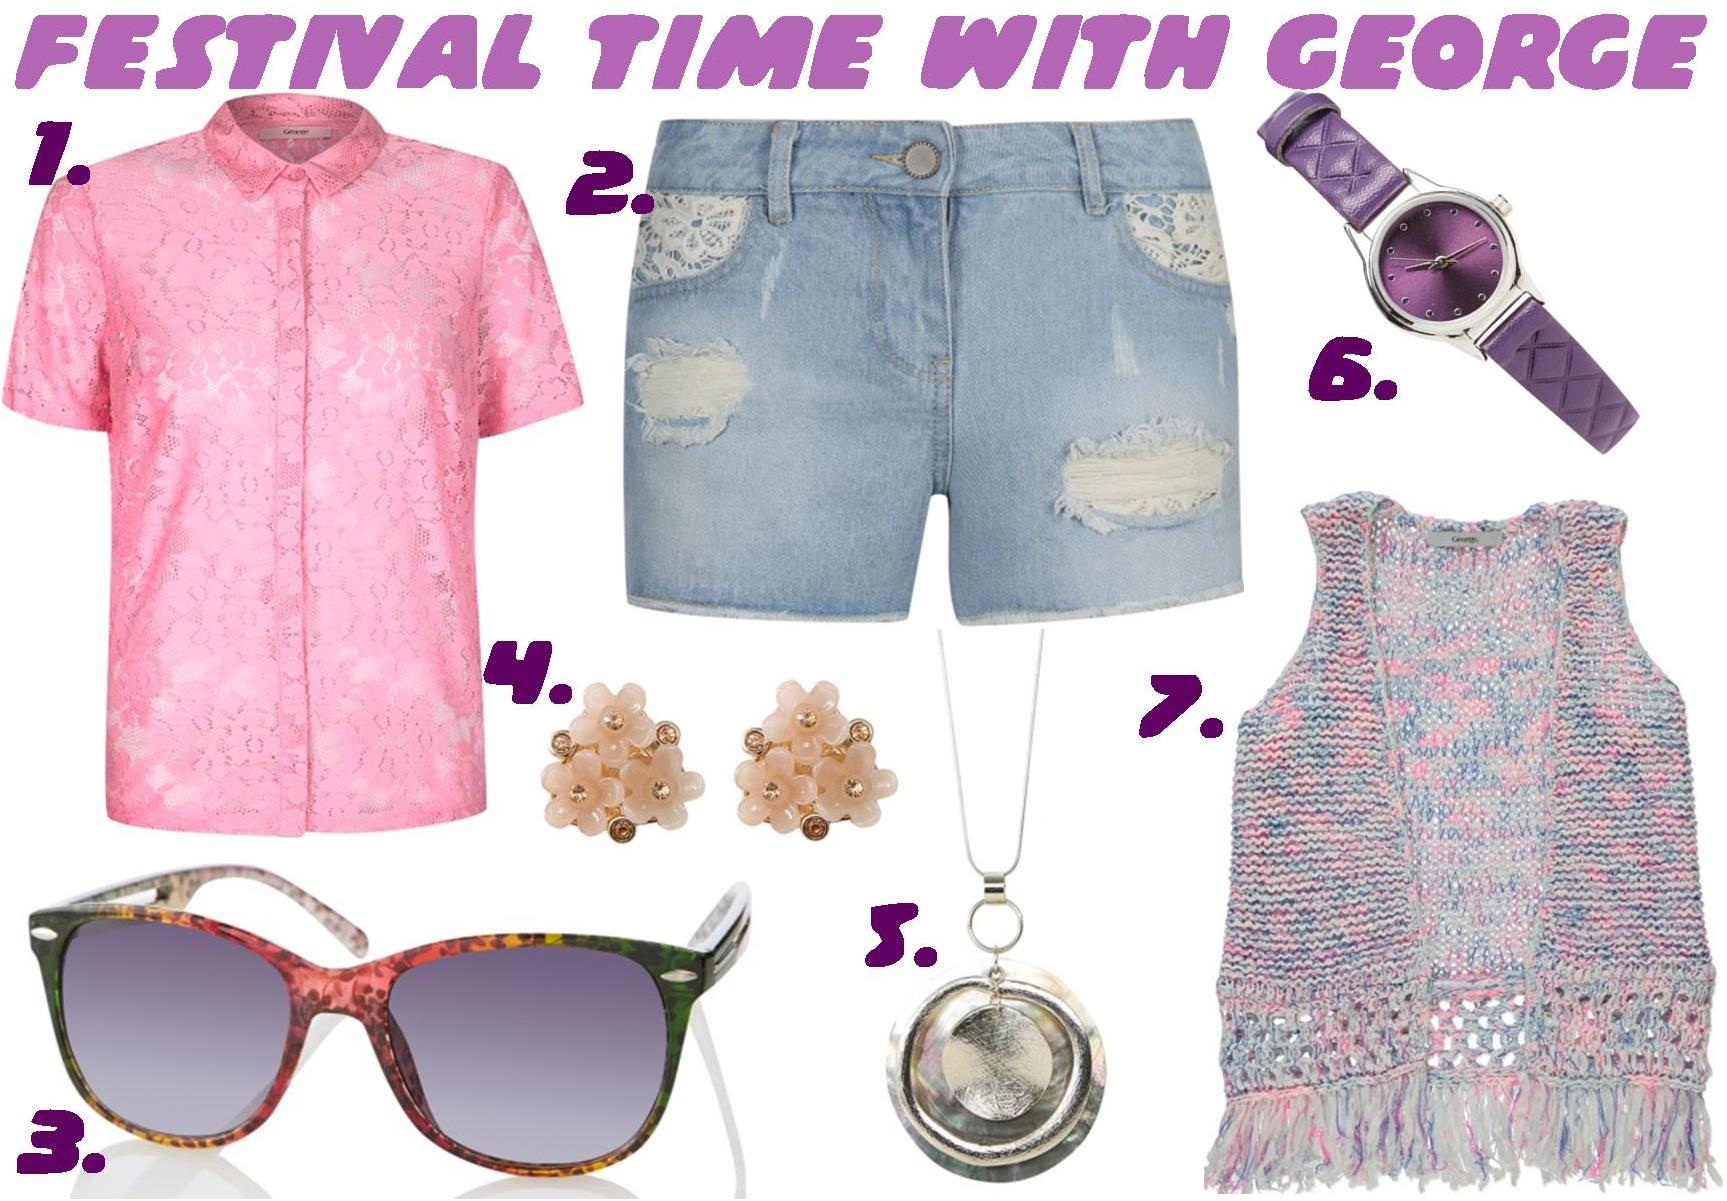 Festival time with George SS14